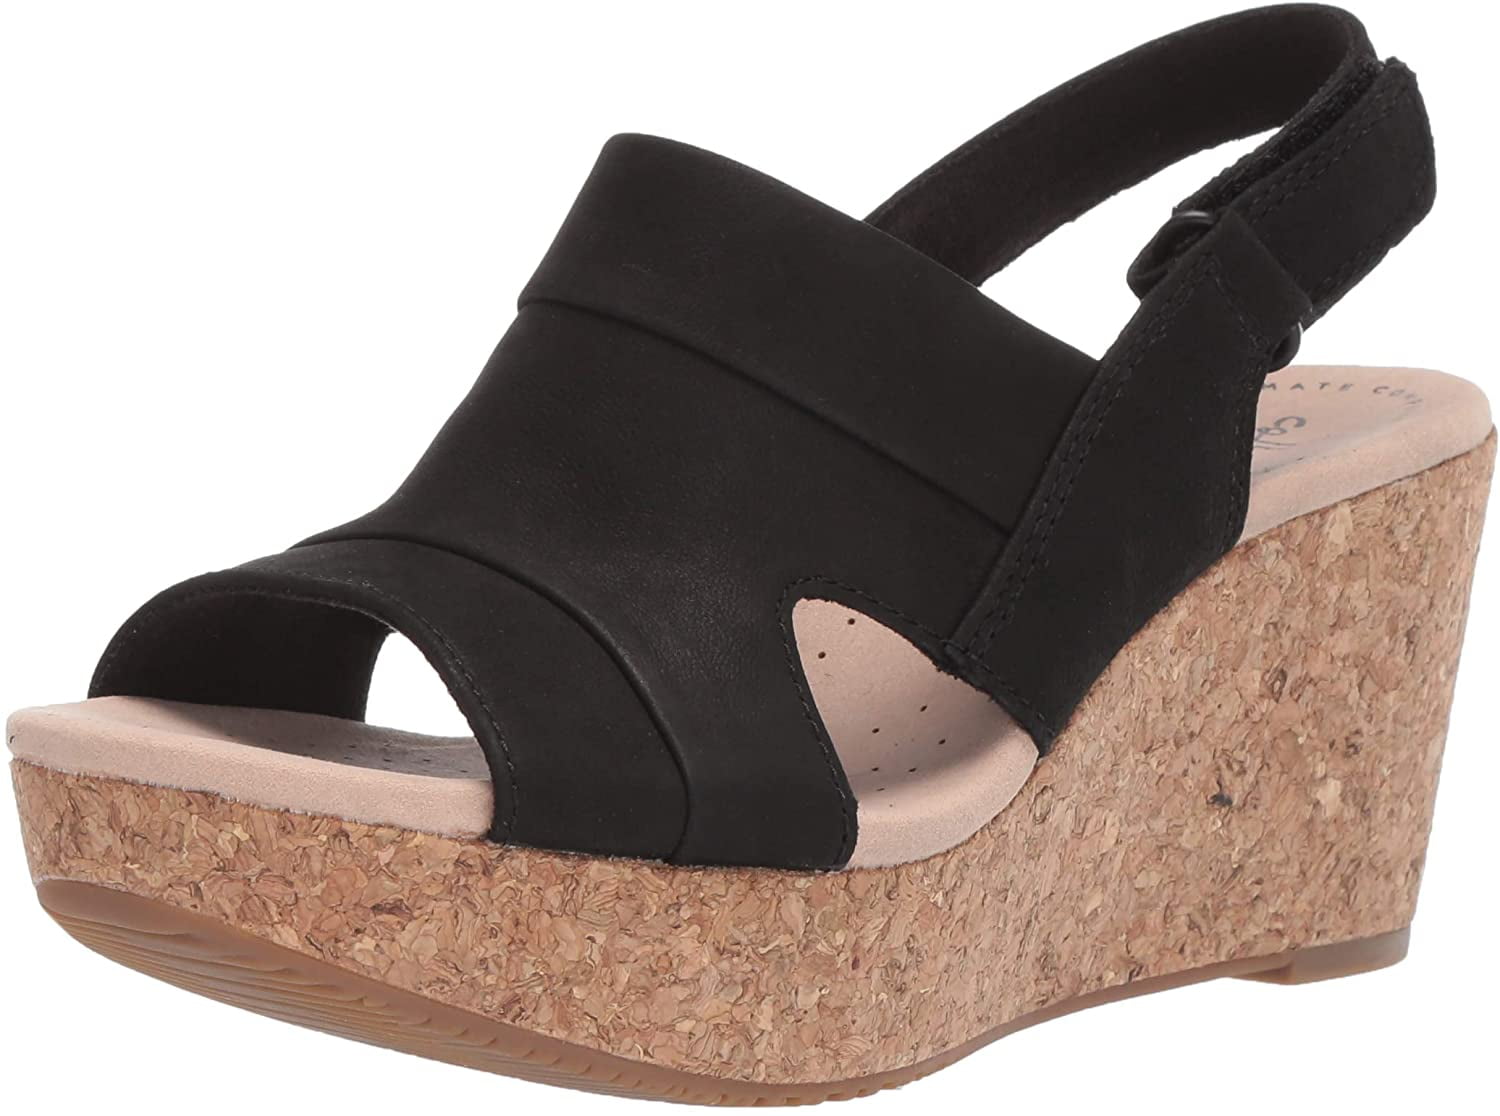 clarks nubuck leather perforated wedges